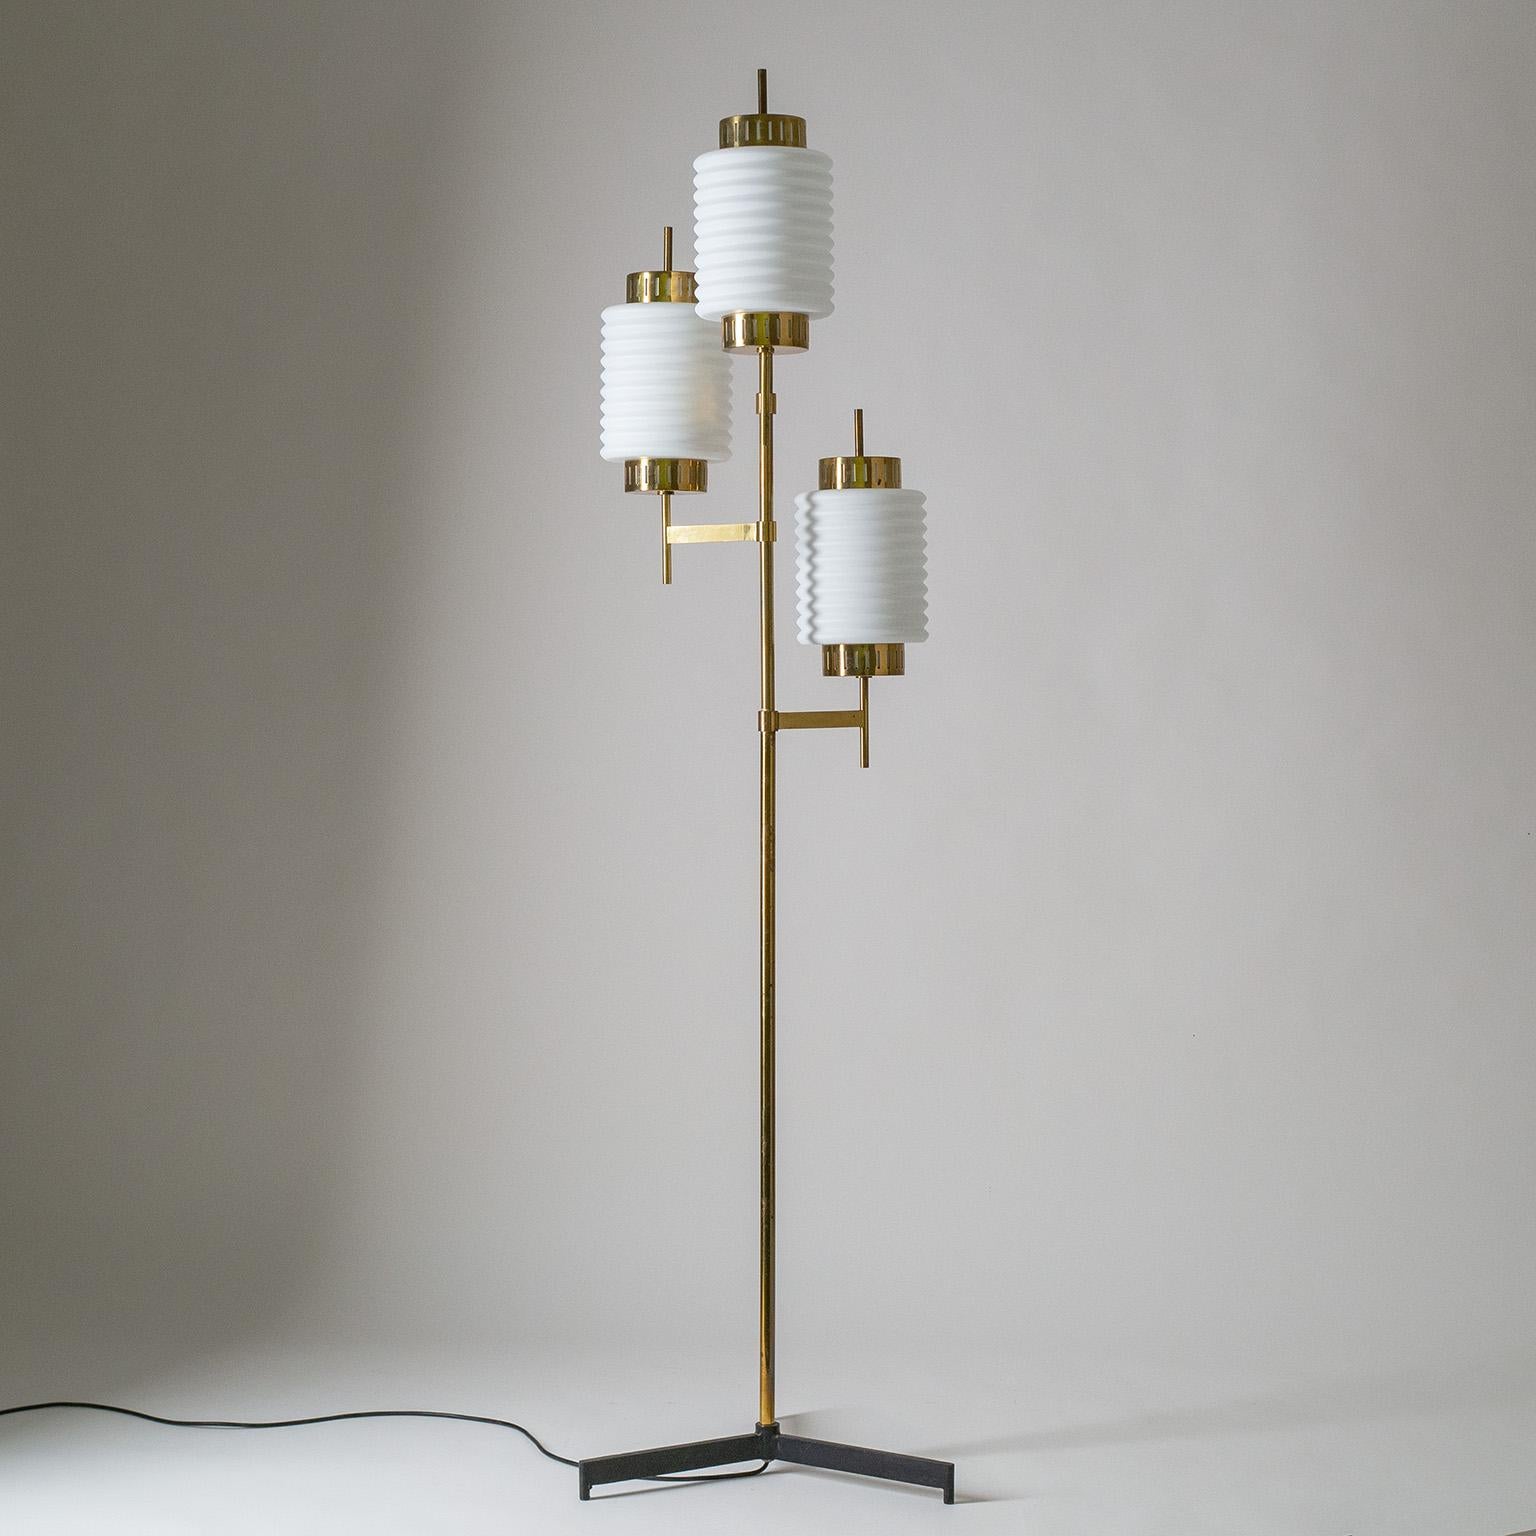 Italian tripod floor lamp in brass with large ribbed satin glass diffusers, circa 1960. Blackened steel base with polished brass body. The ribbed glass diffusers have a thick white inner casing with a satin finish on the outside. Brass and ceramic